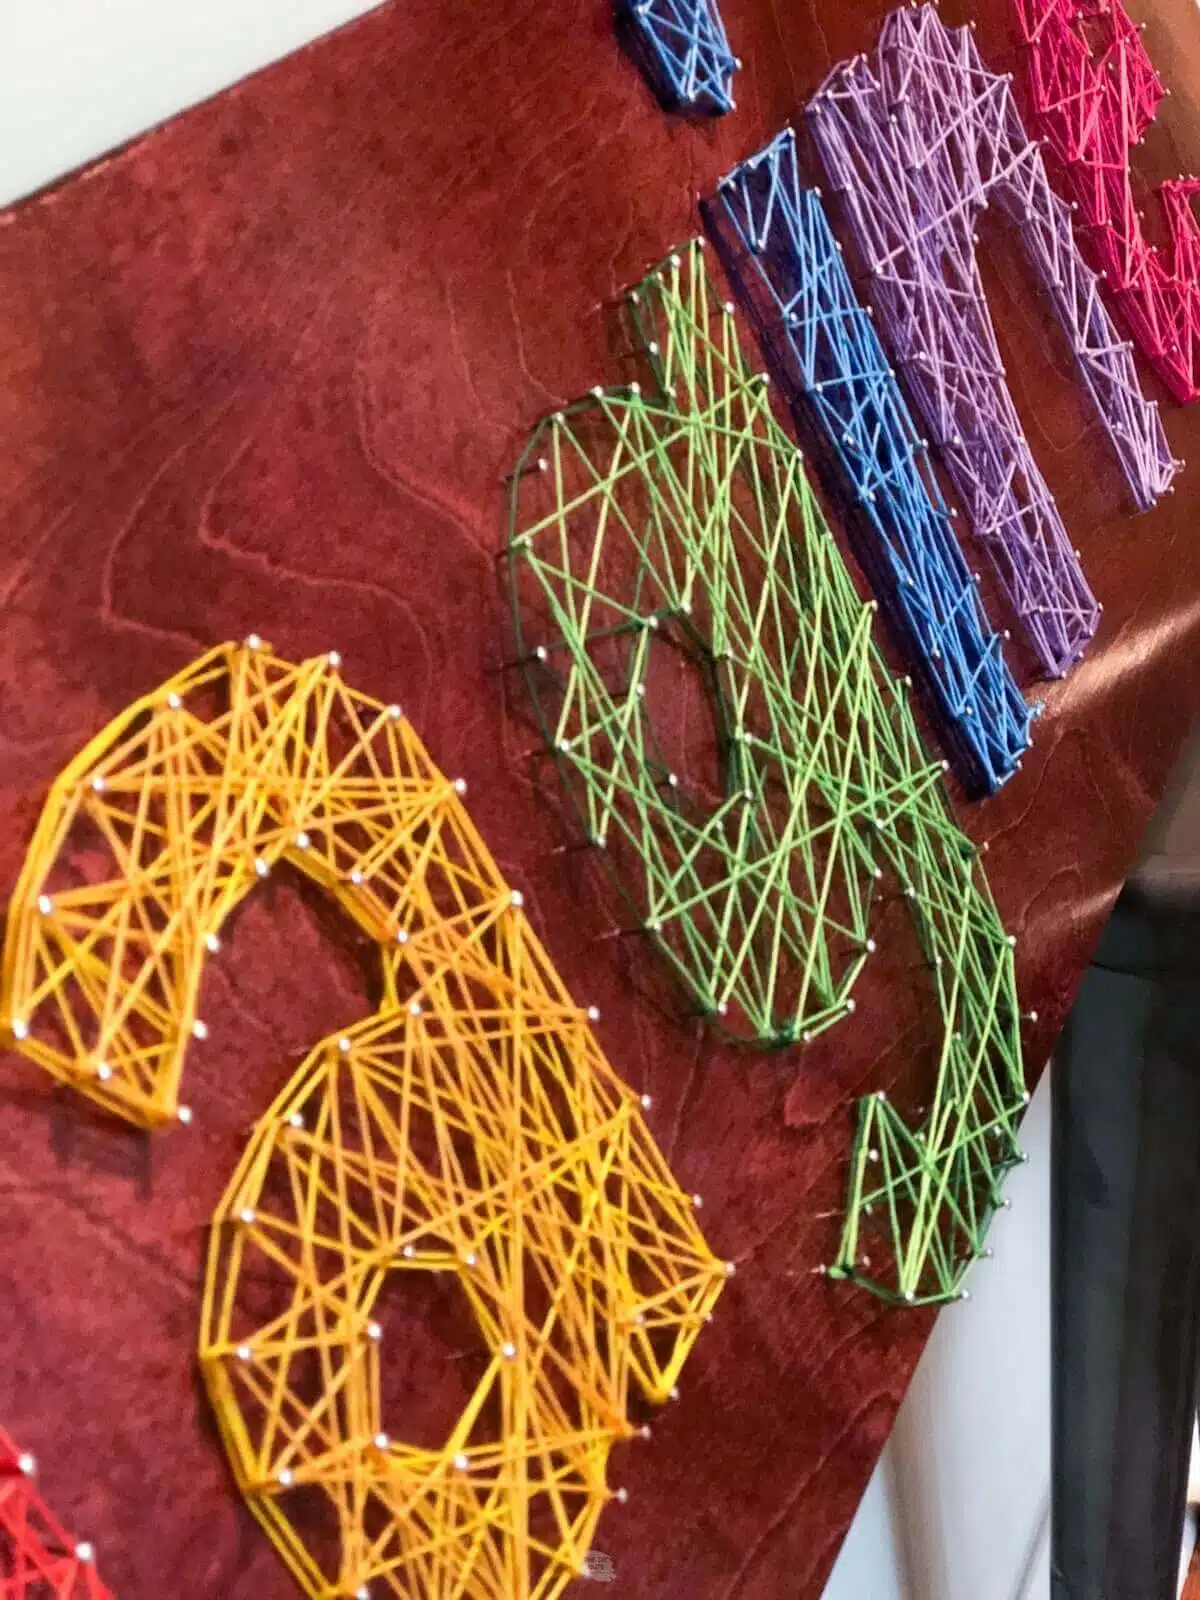 up close view of string art seeing yellow a, green g, blue i and purple n.